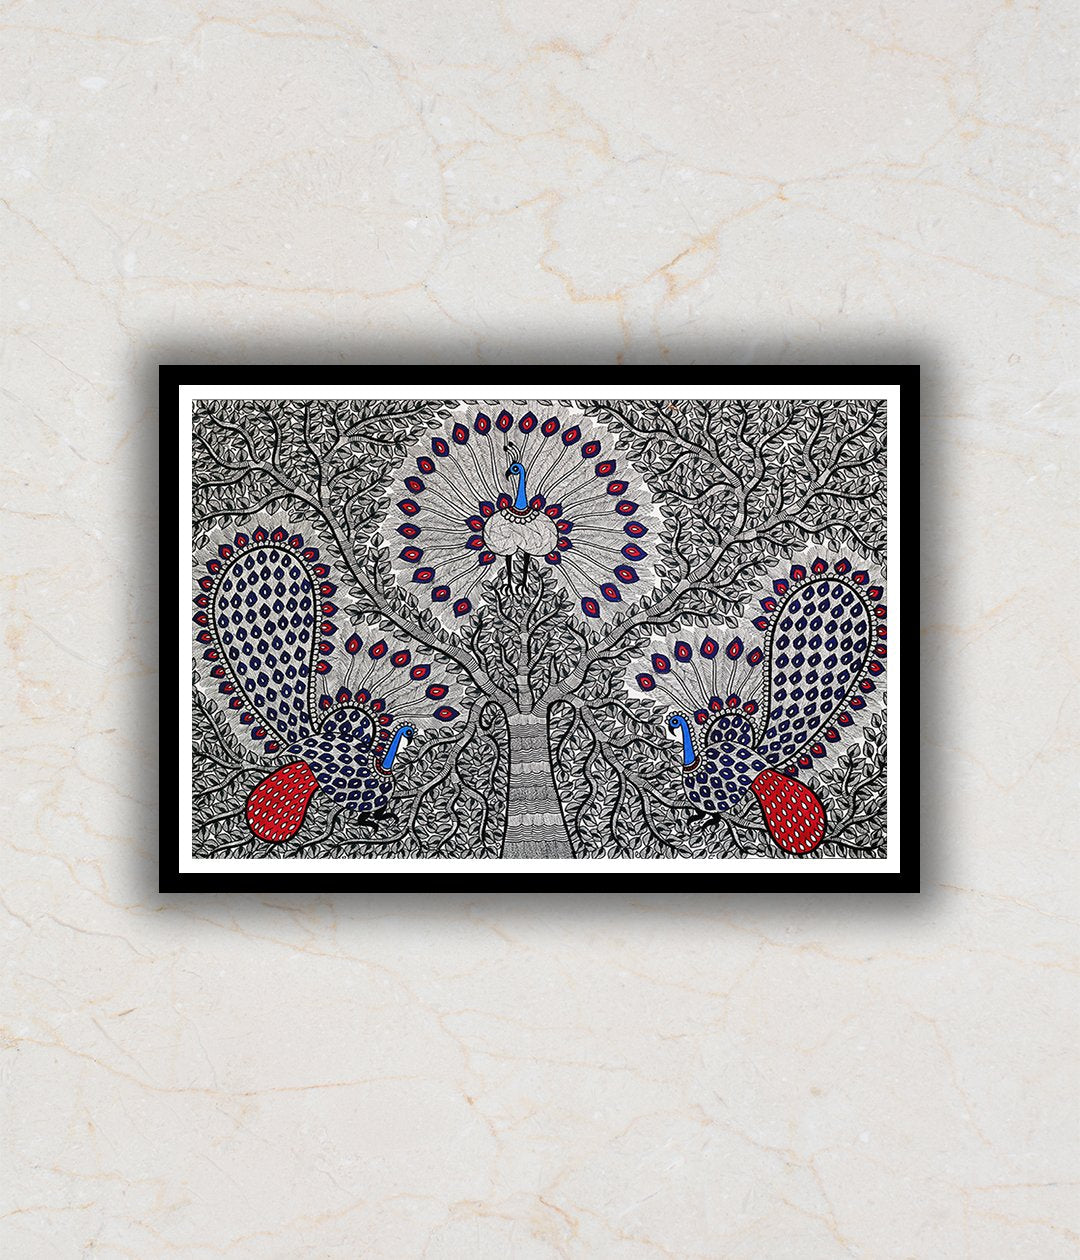 Magnificence of Feathers Madhubani Art Painting For Home Wall Art Decor